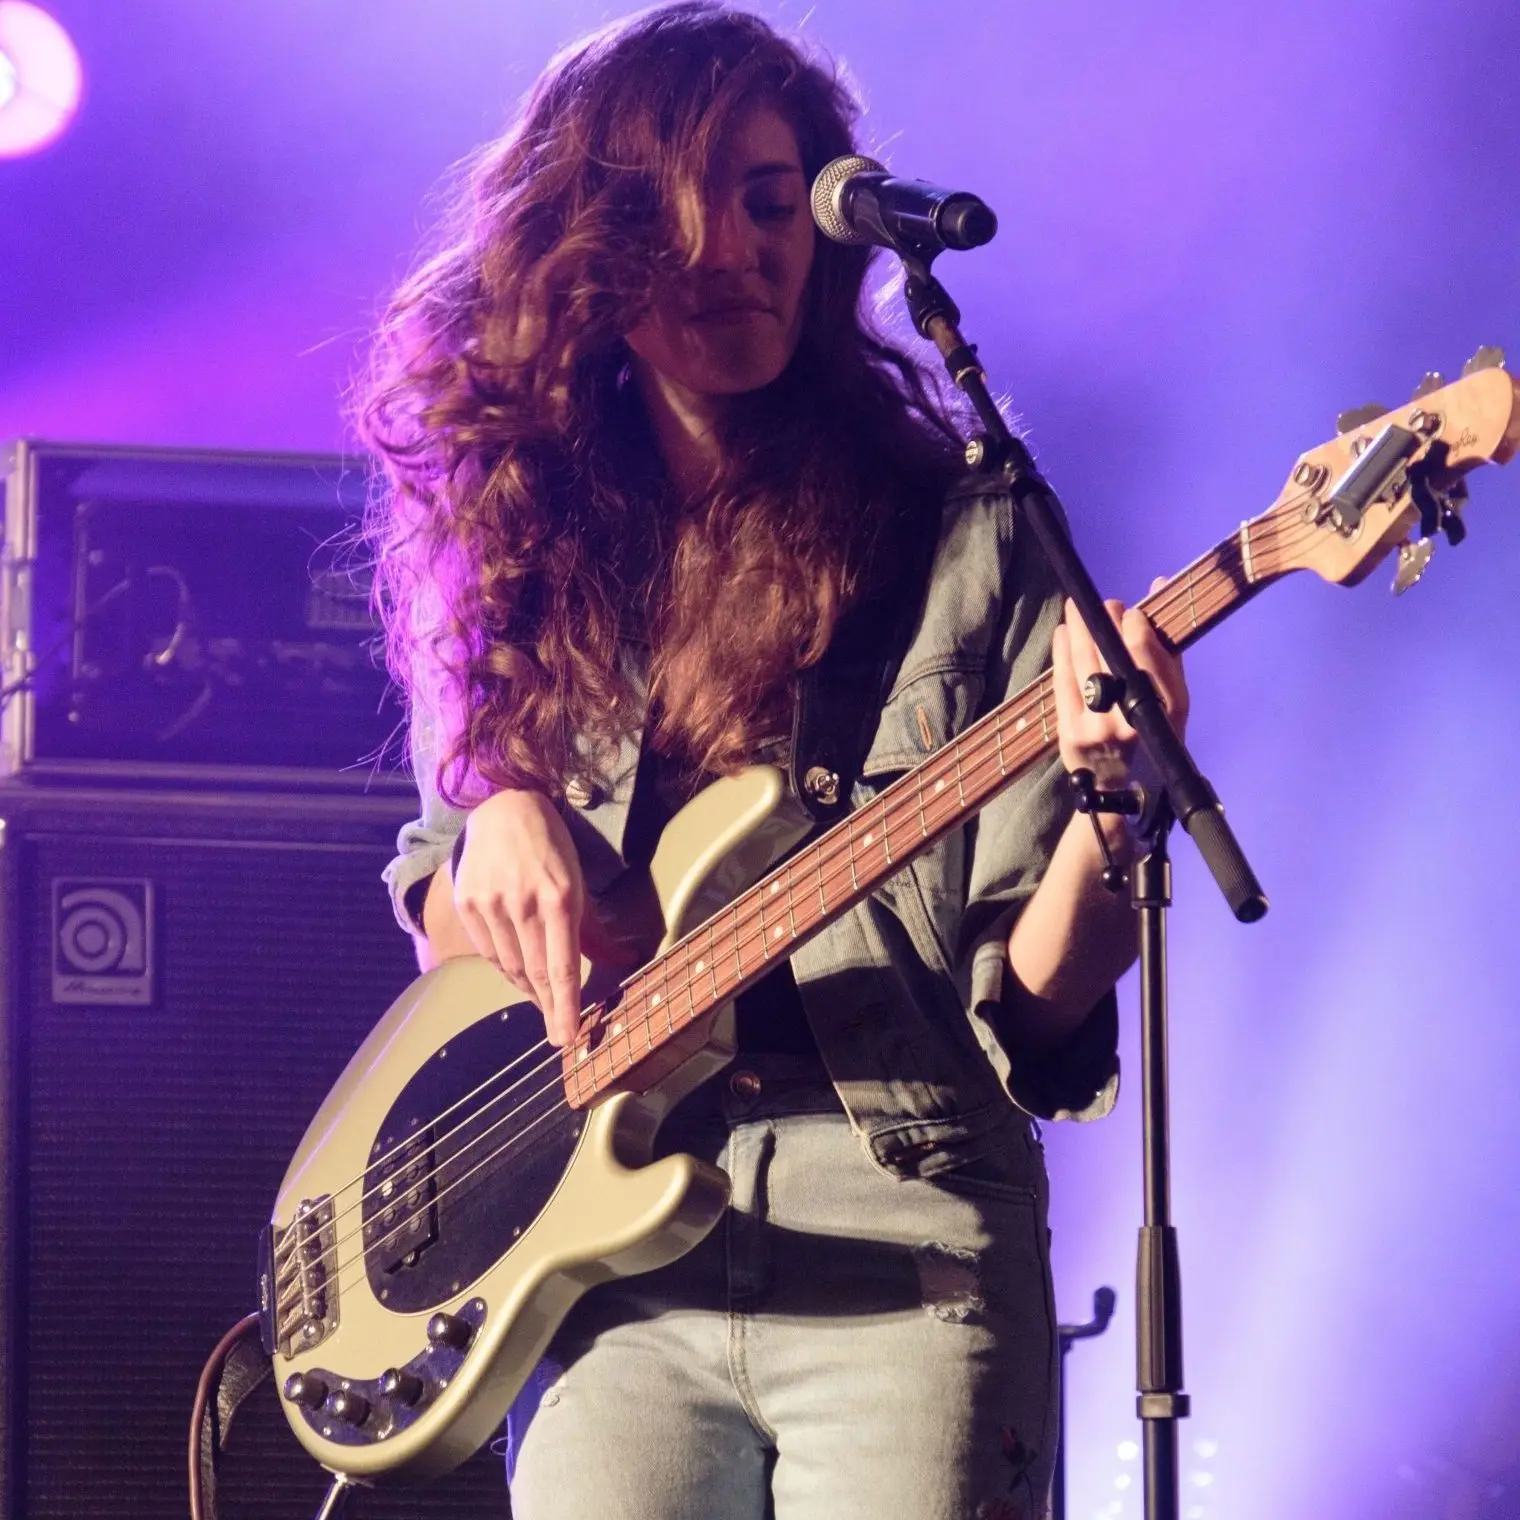 Woman playing a live performance on stage. Standing behind a microphone playing a bass guitar. Her brown hair is covering most of her face. Bright purple lights shine behind her.